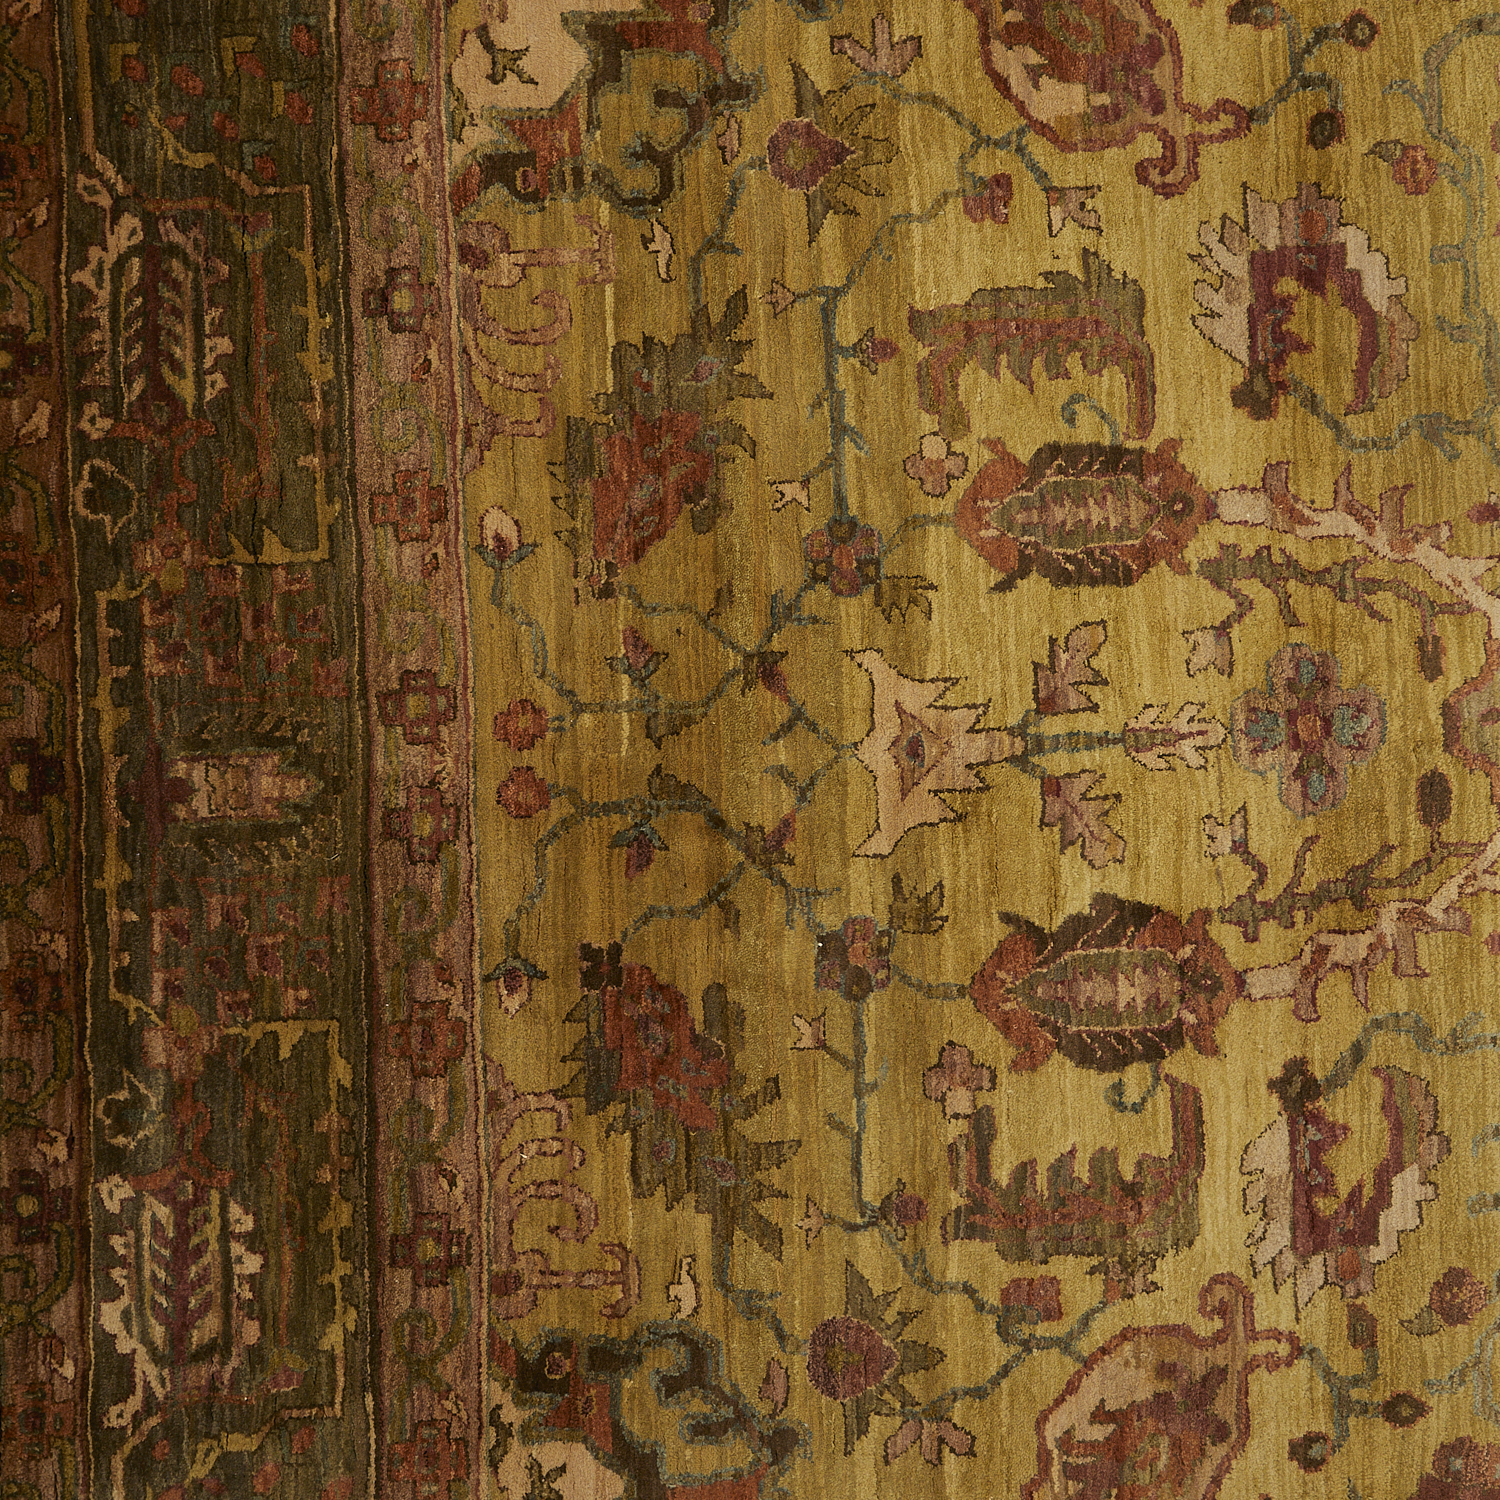 Palace Size Persian Feraghan Rug 15' x 11'9" - Image 4 of 8